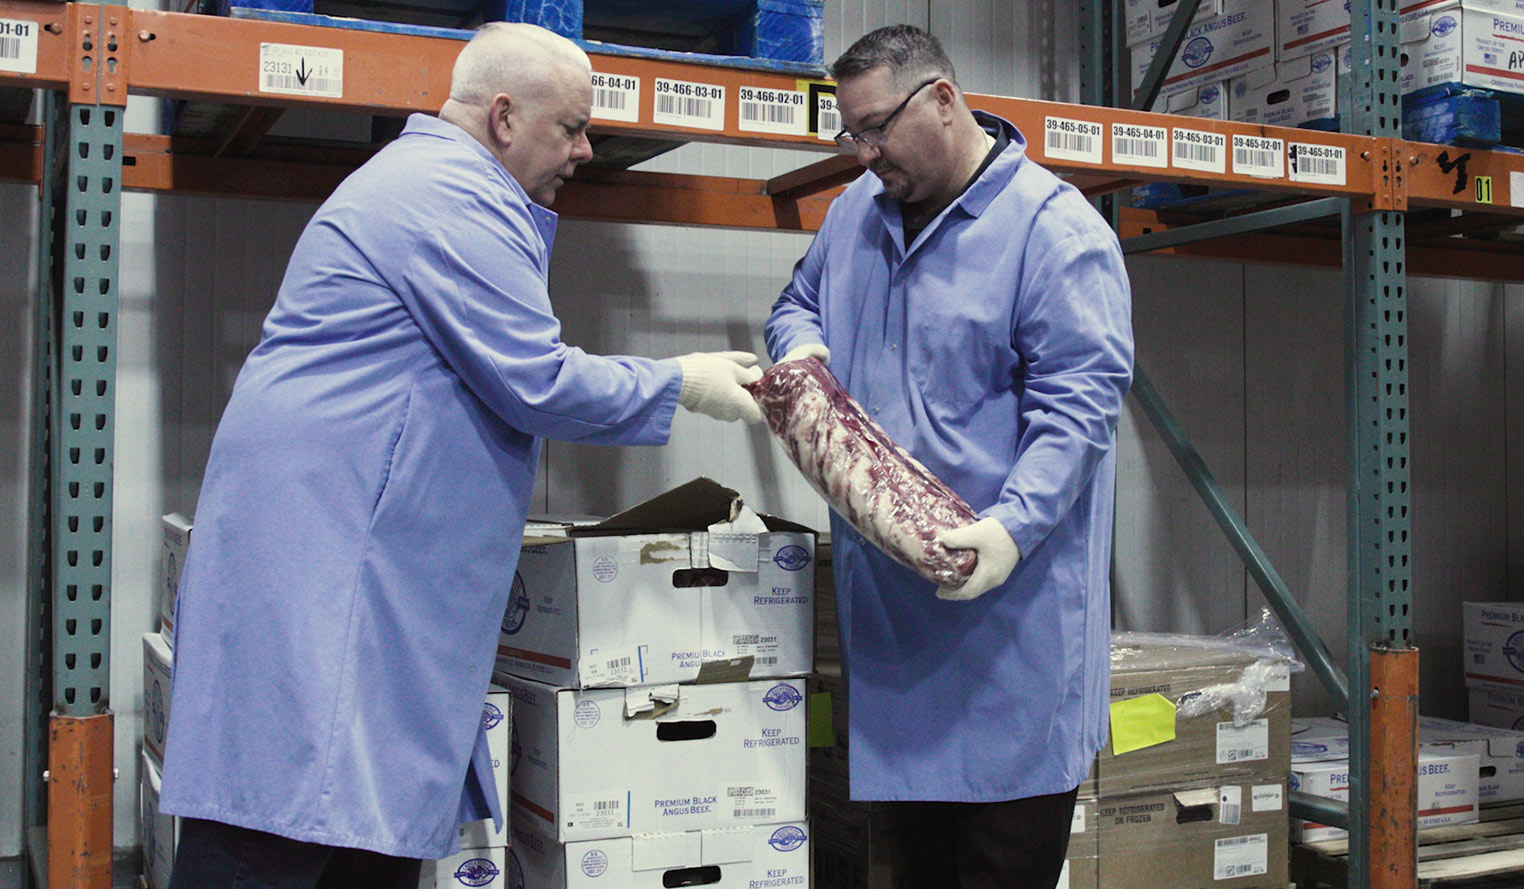 Two men in personal protective equipment jackets and gloves handling packaged meat from delivery boxes